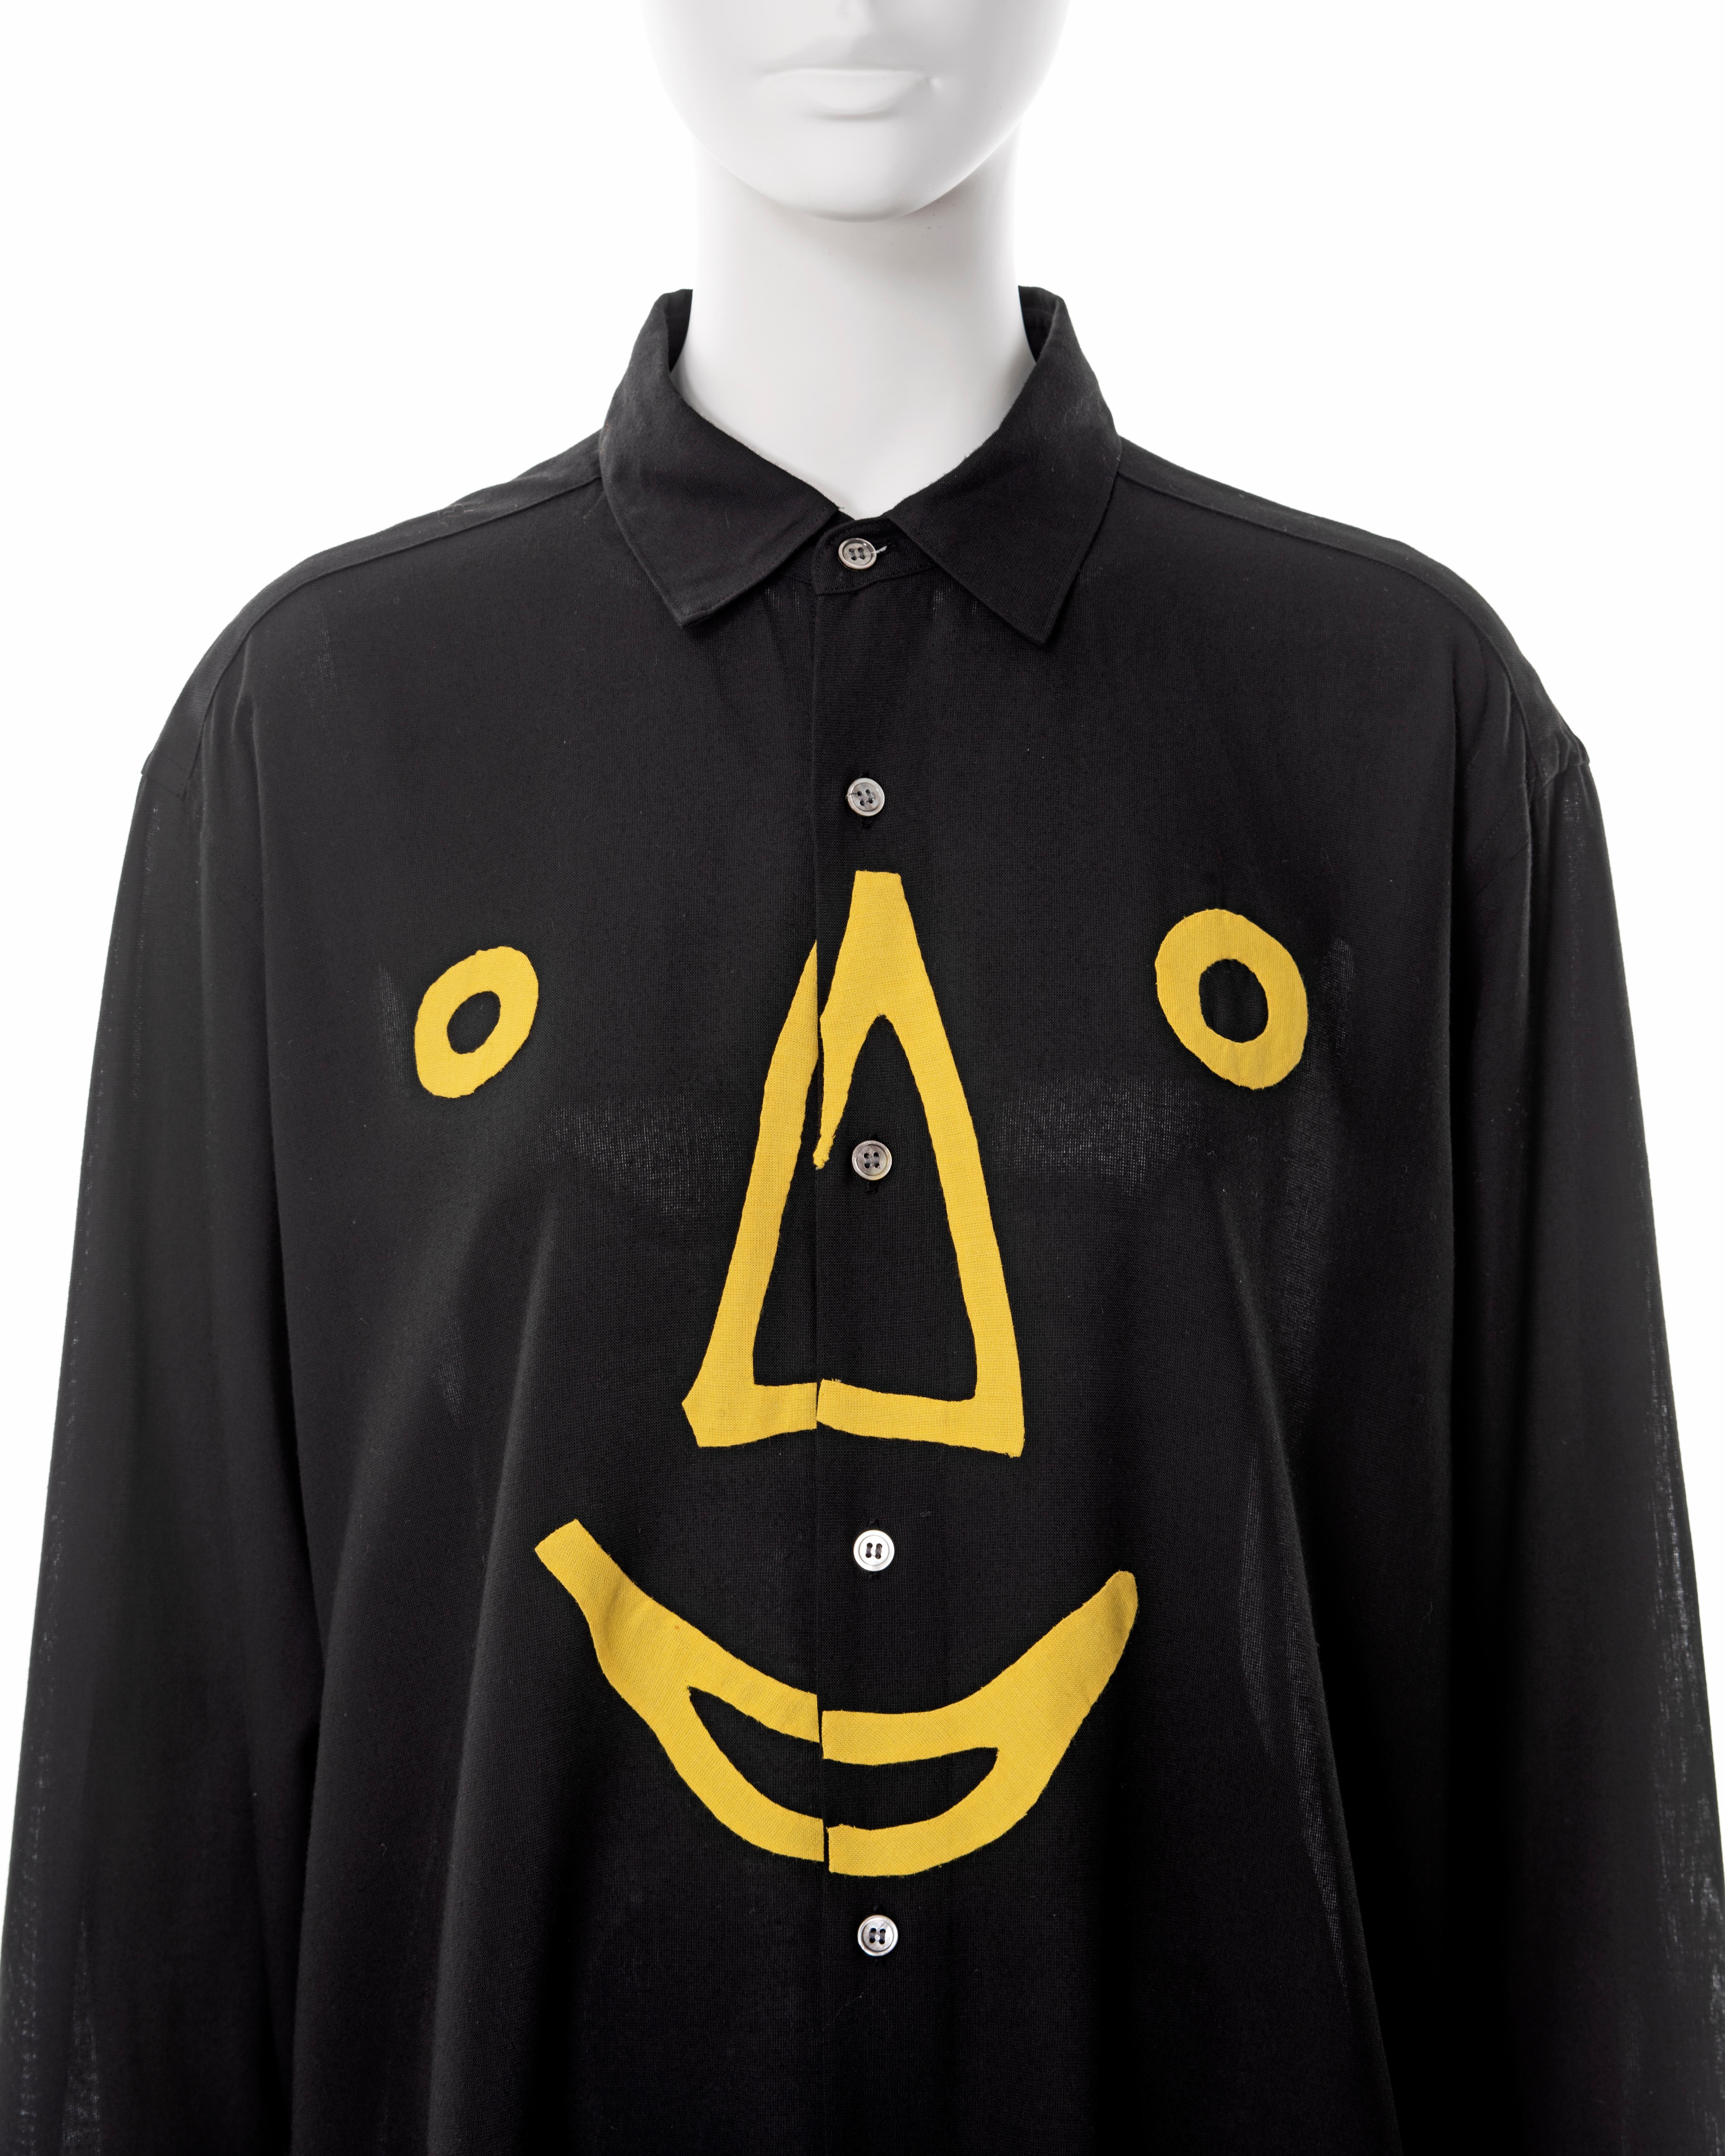 Yohji Yamamoto men's black rayon 'Smiley Face' shirt, fw 1991 In Excellent Condition For Sale In London, GB